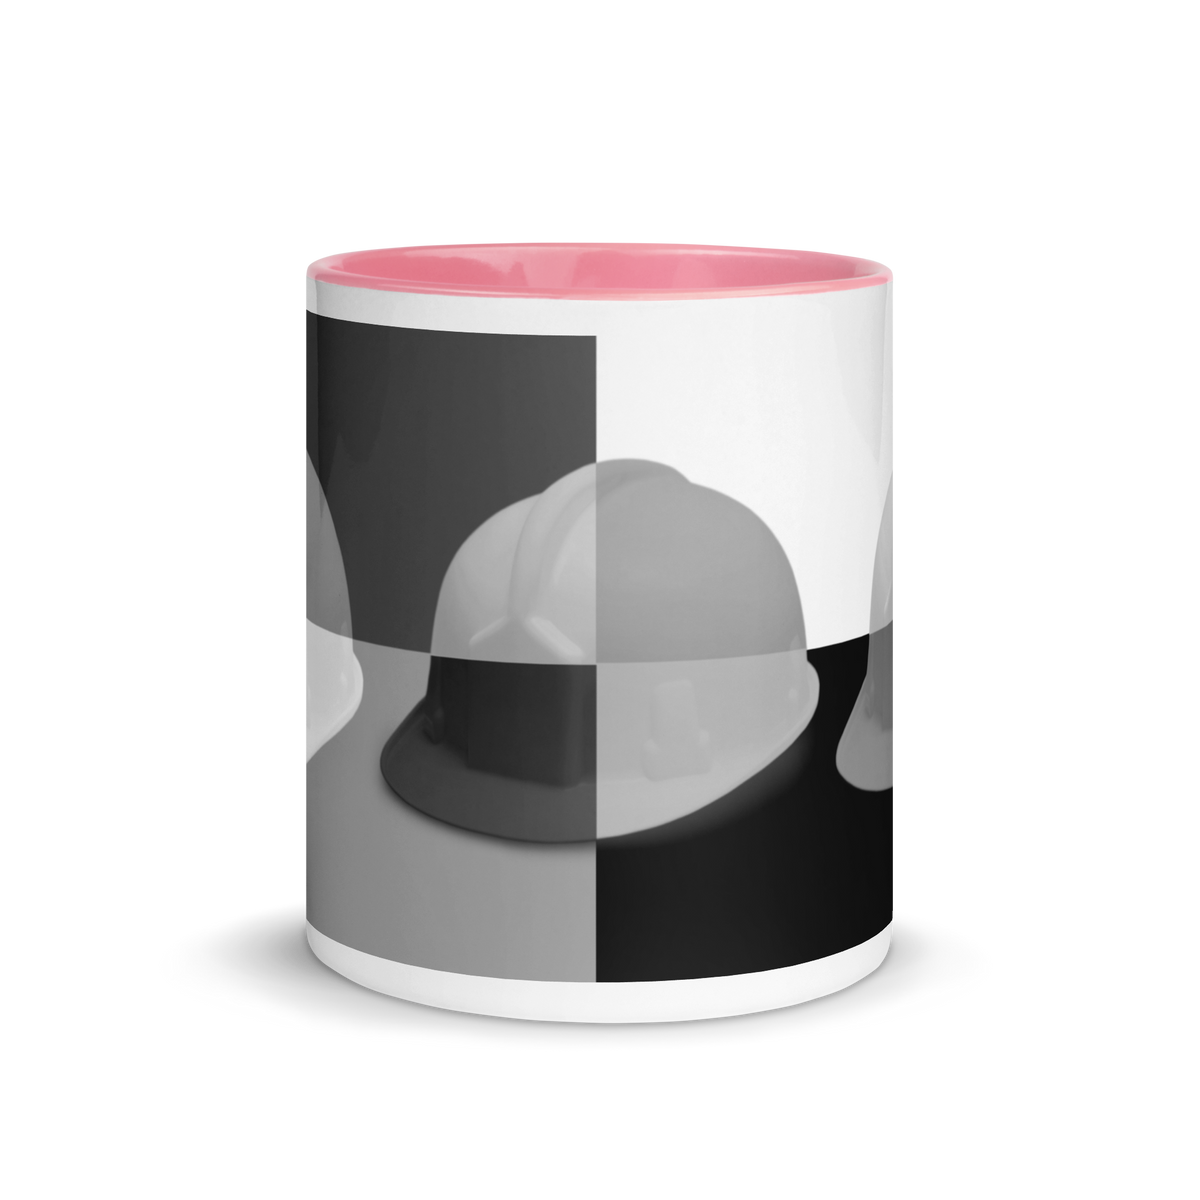 White ceramic mug with a bold hard hat pop art print in a black and grey colorway with pink color on the inside, the rim, and the handle.